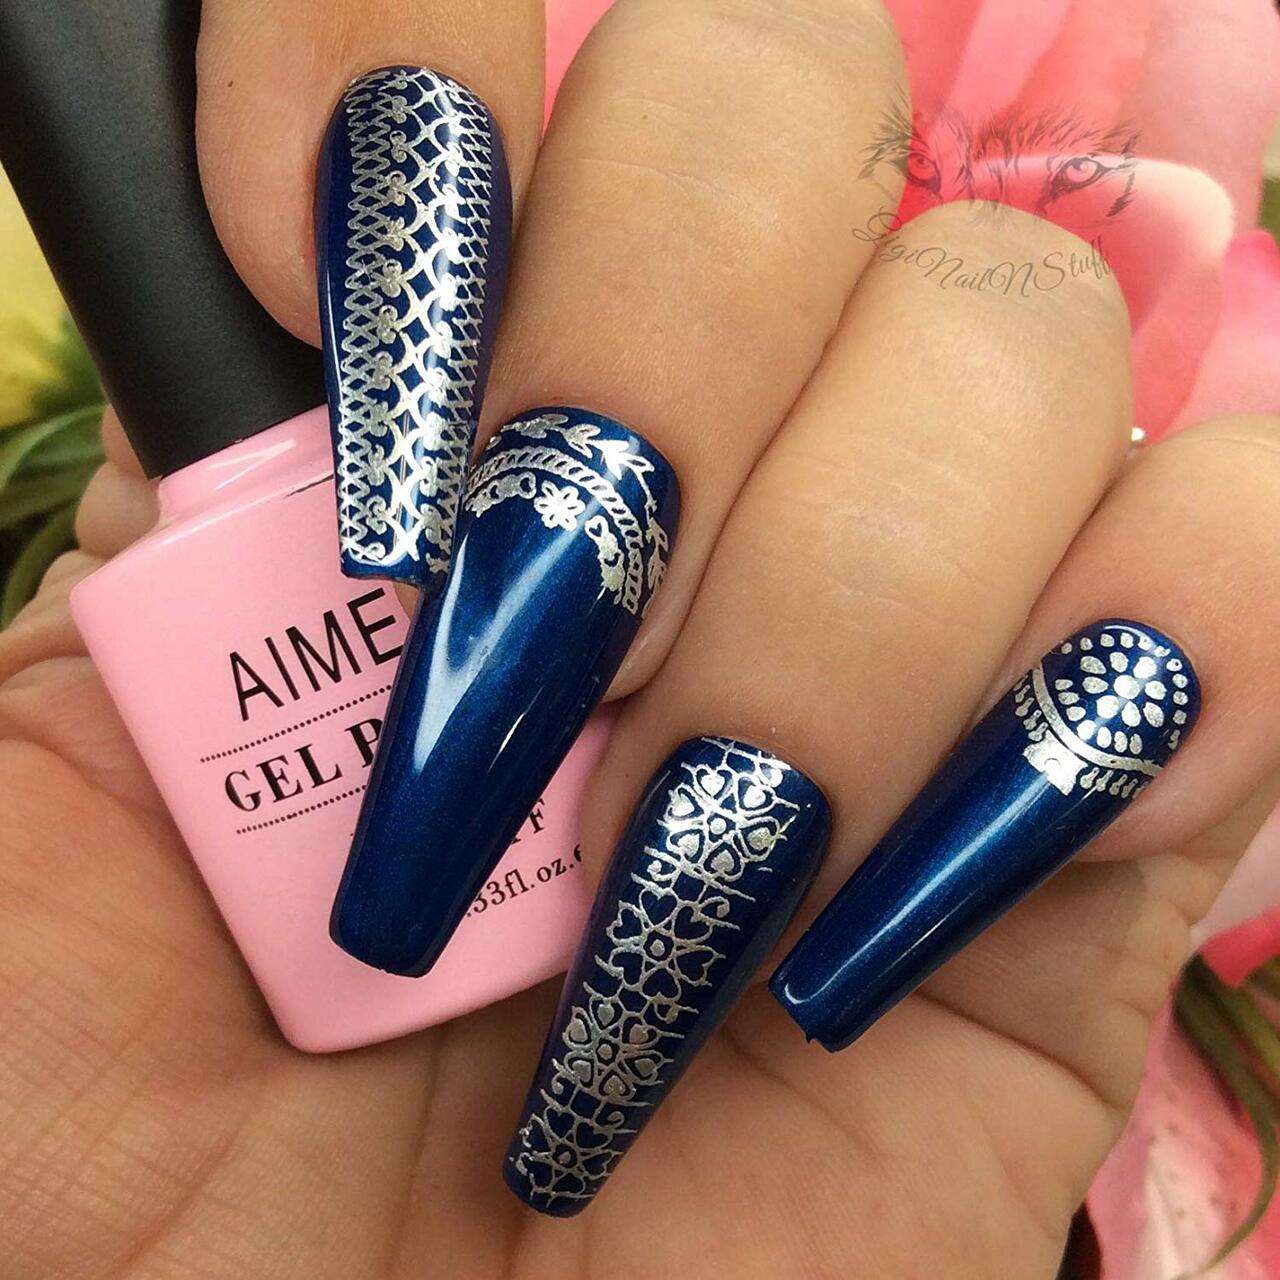 11 New Year Nail Art Designs For Those Who Want To Go Beyond The Basic  Glitter Polish - Elle India